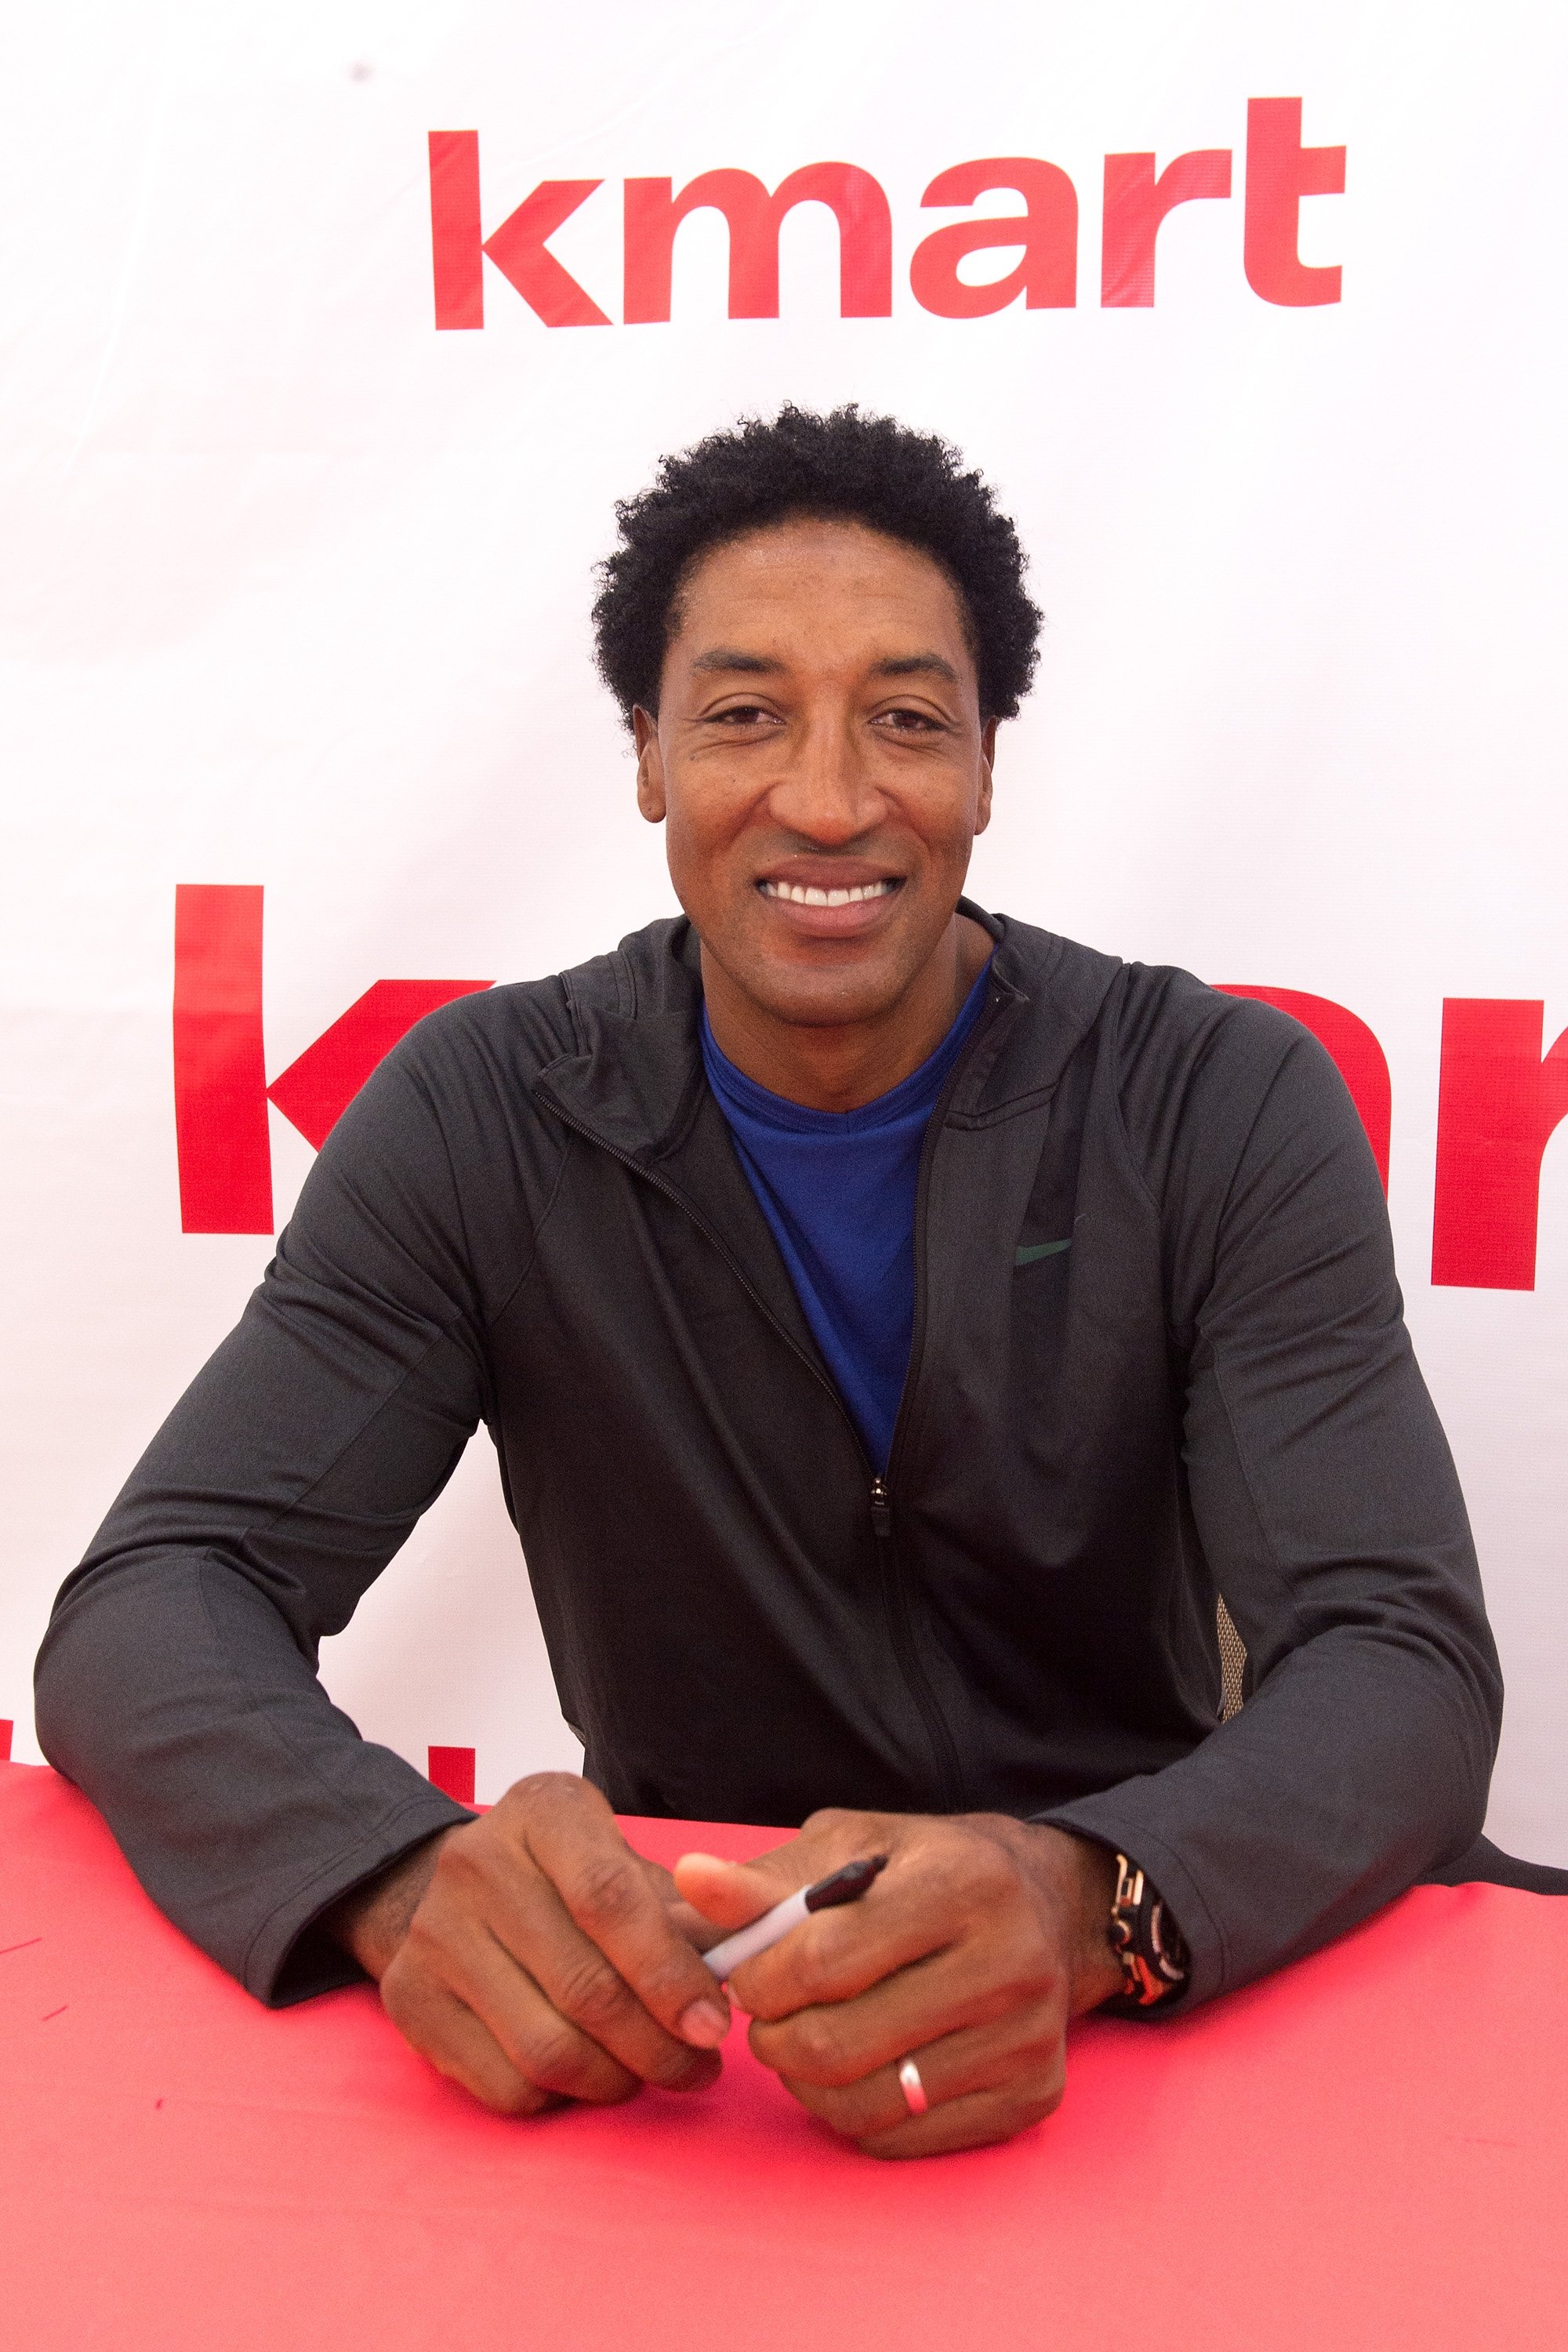 Scottie Pippen attends 'A Whole Lotta Awesome' At Re-Grand Opening of Revitalized Kmart Store on August 27, 2016 in Des Plaines, Illinois | Photo: GettyImages